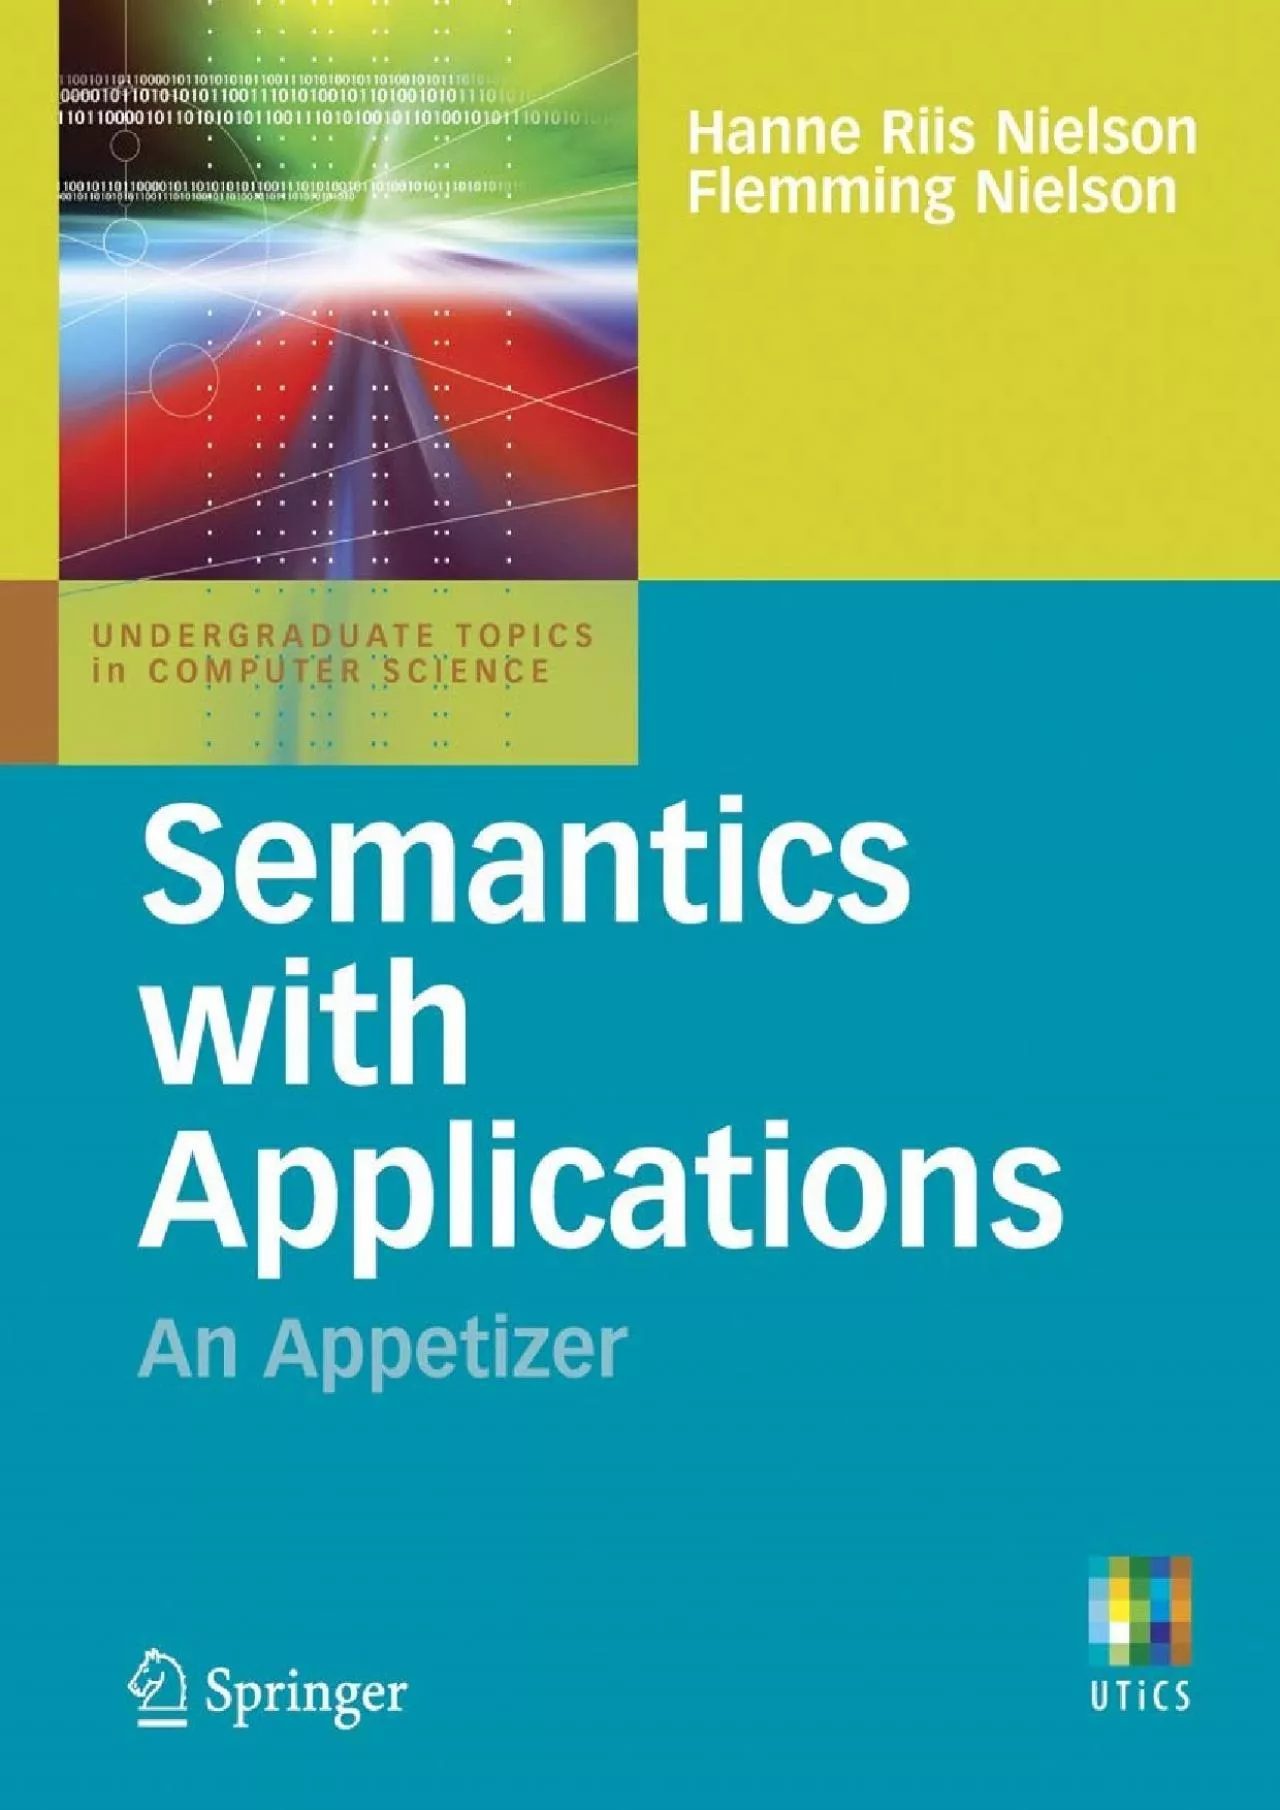 [READING BOOK]-Semantics with Applications: An Appetizer (Undergraduate Topics in Computer